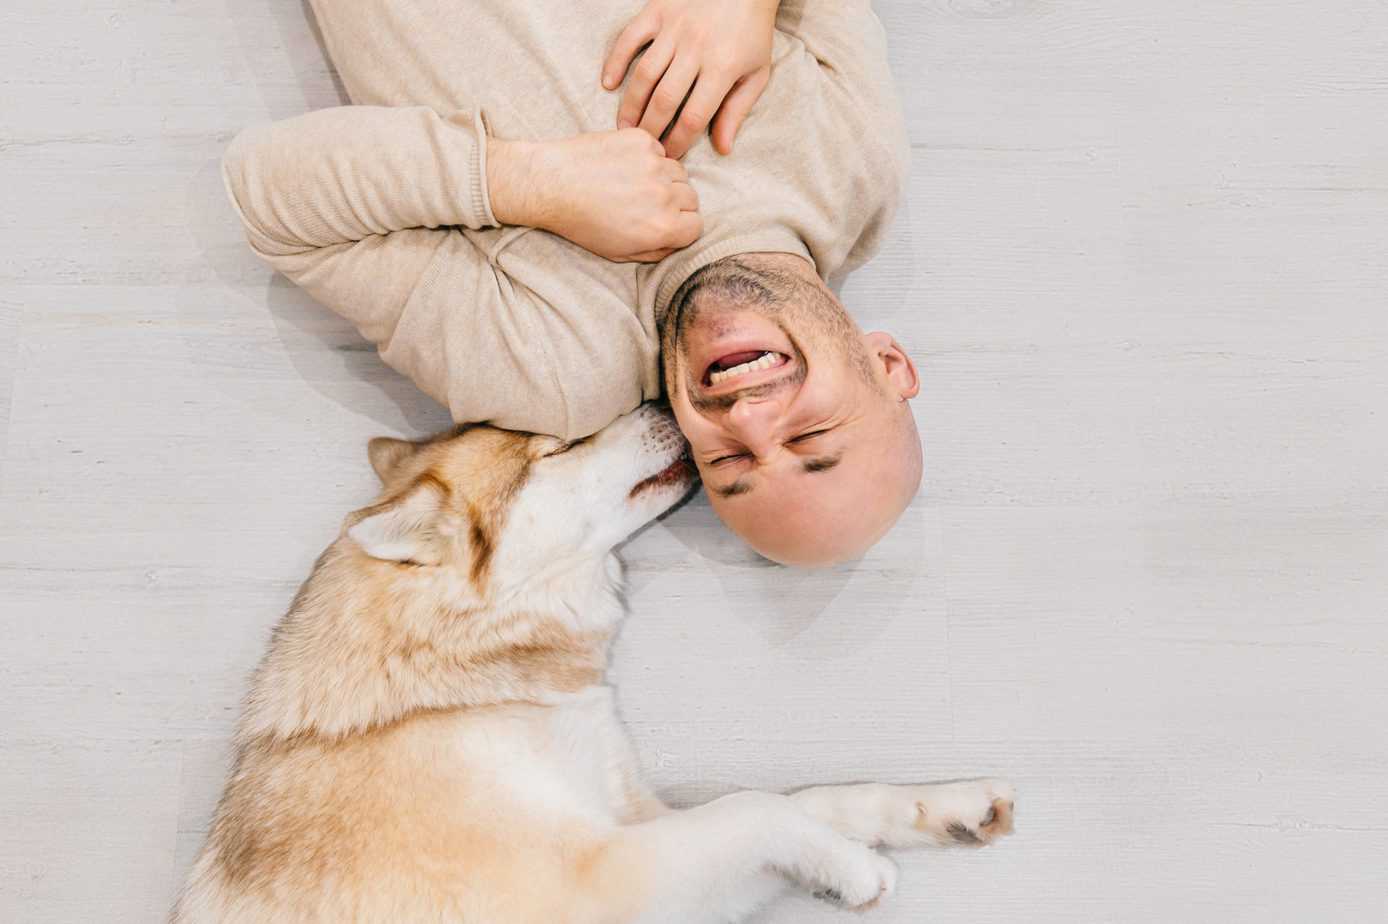 Husky kisses owner. To make your dog happier, find ways to spend more time with your dog.